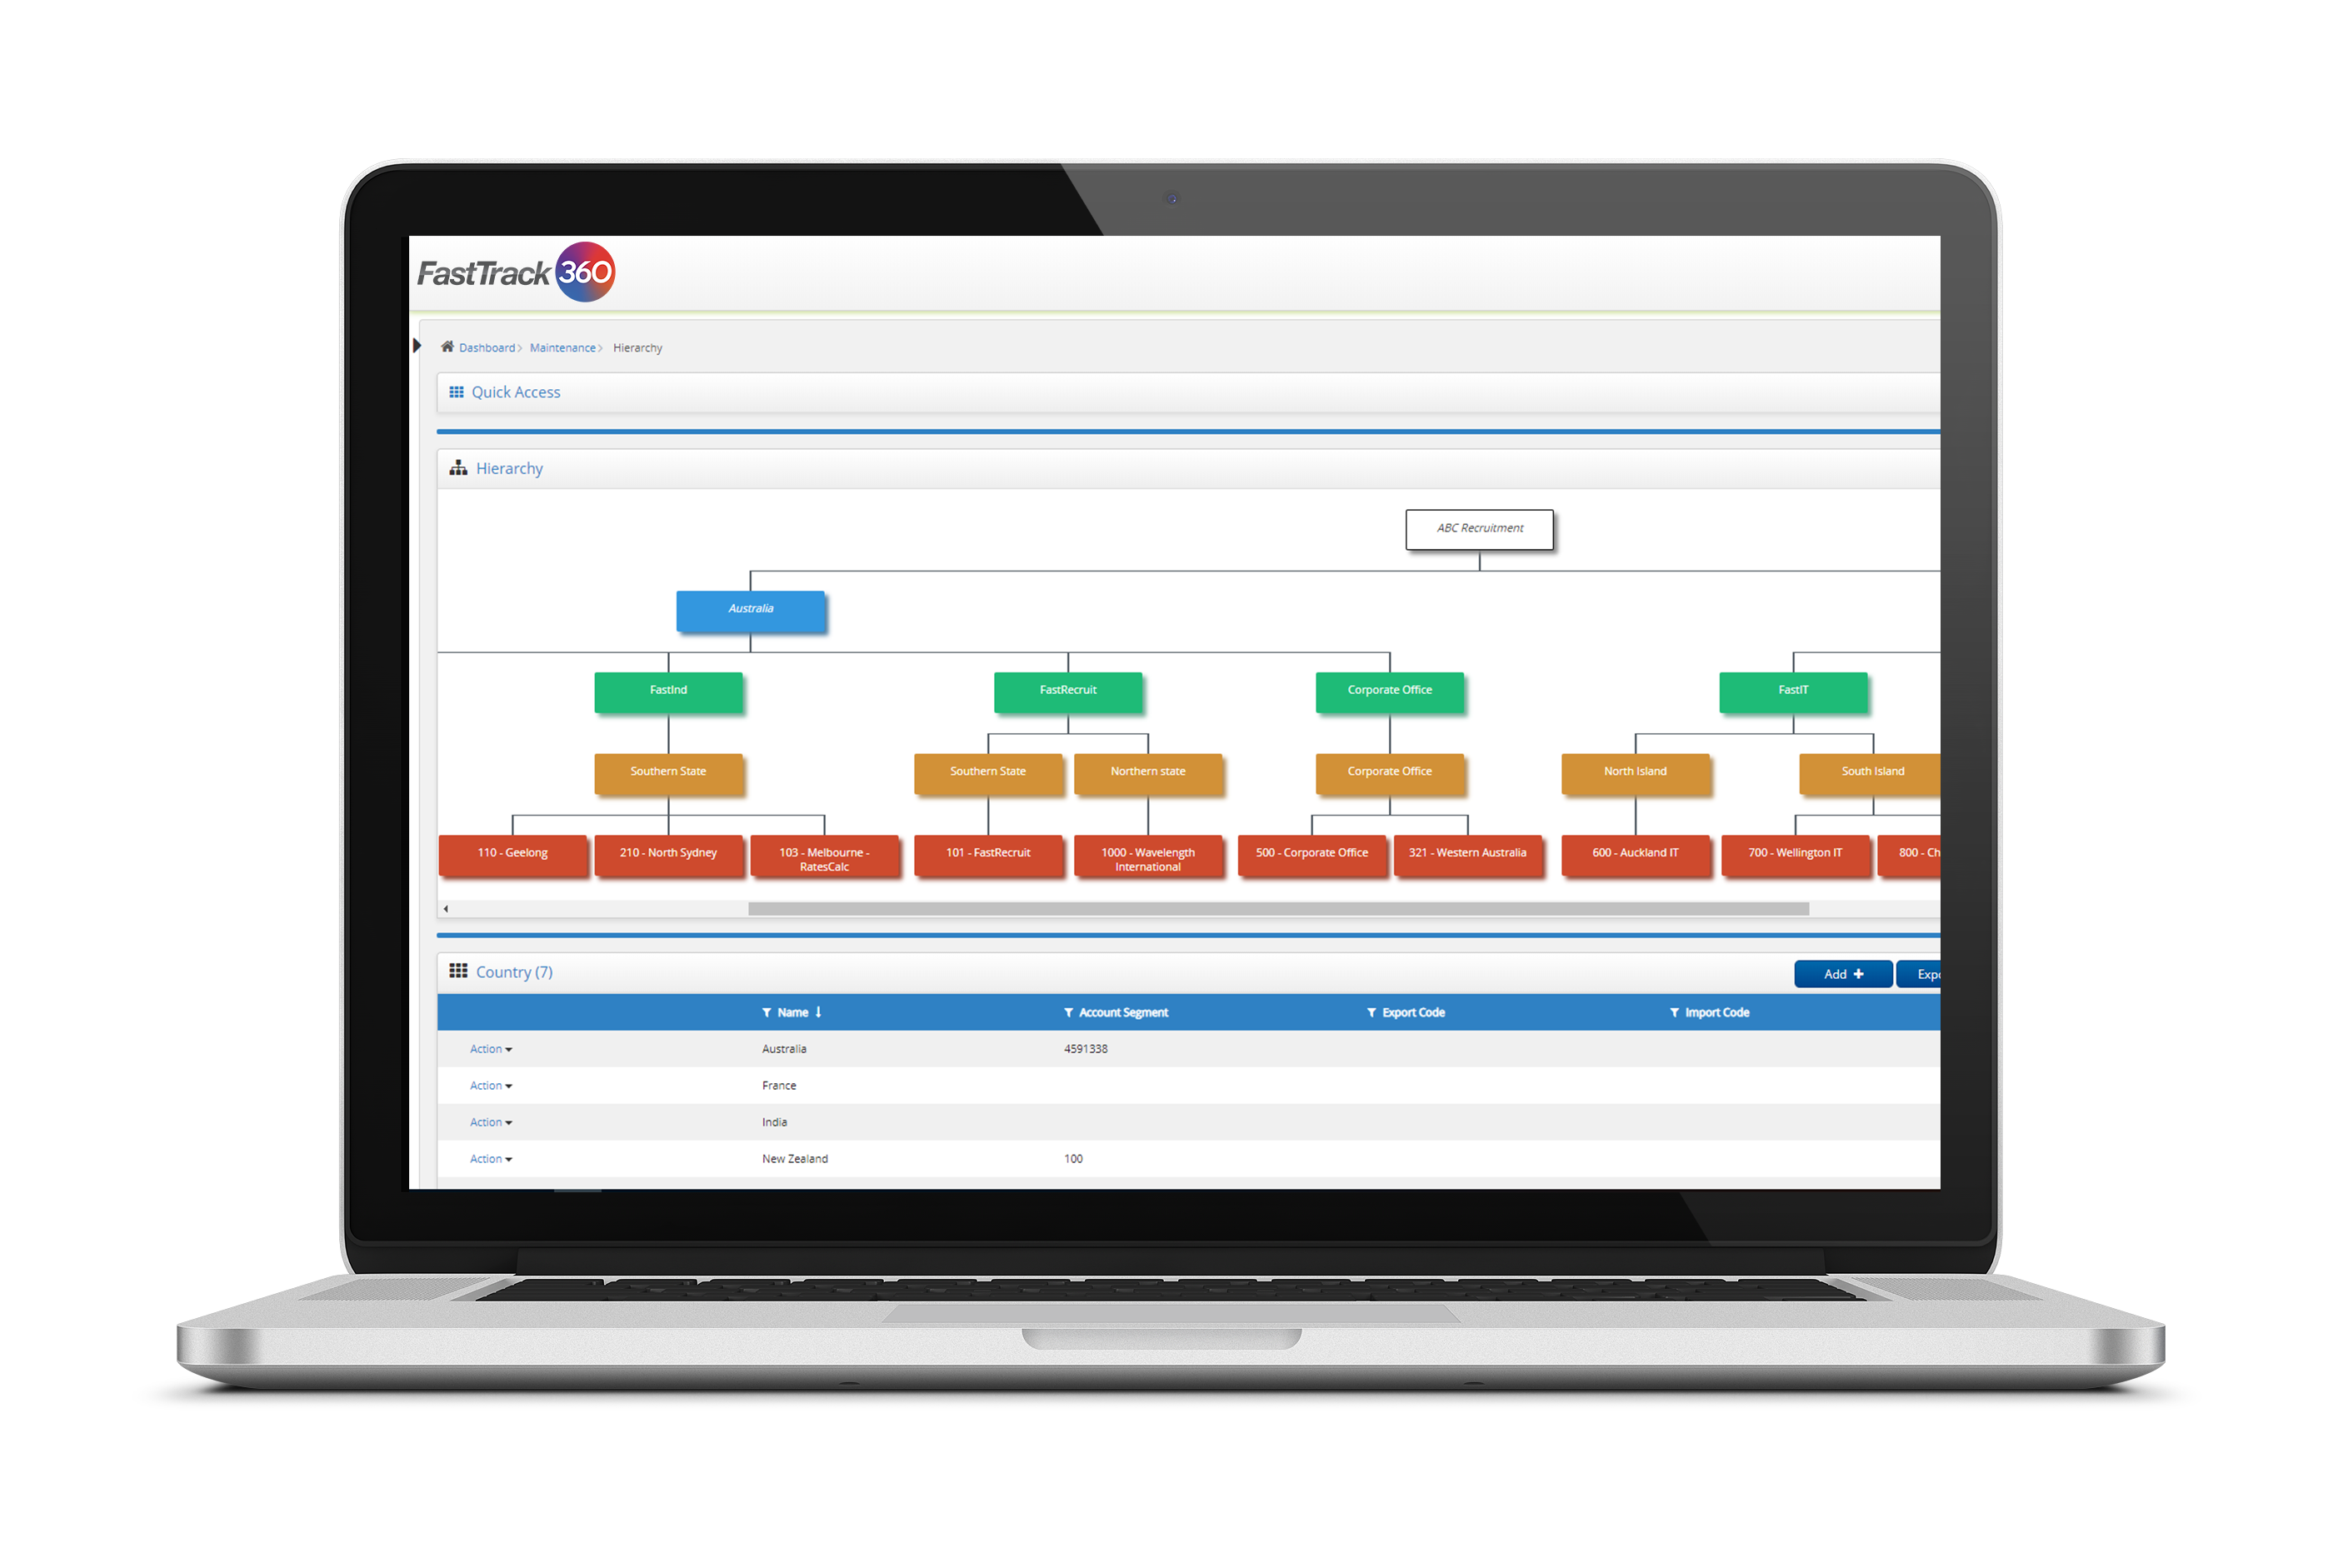 Designed to help you grow and scale, set up an organisational hierarchy in FastTrack360 end-to-end talent management software.